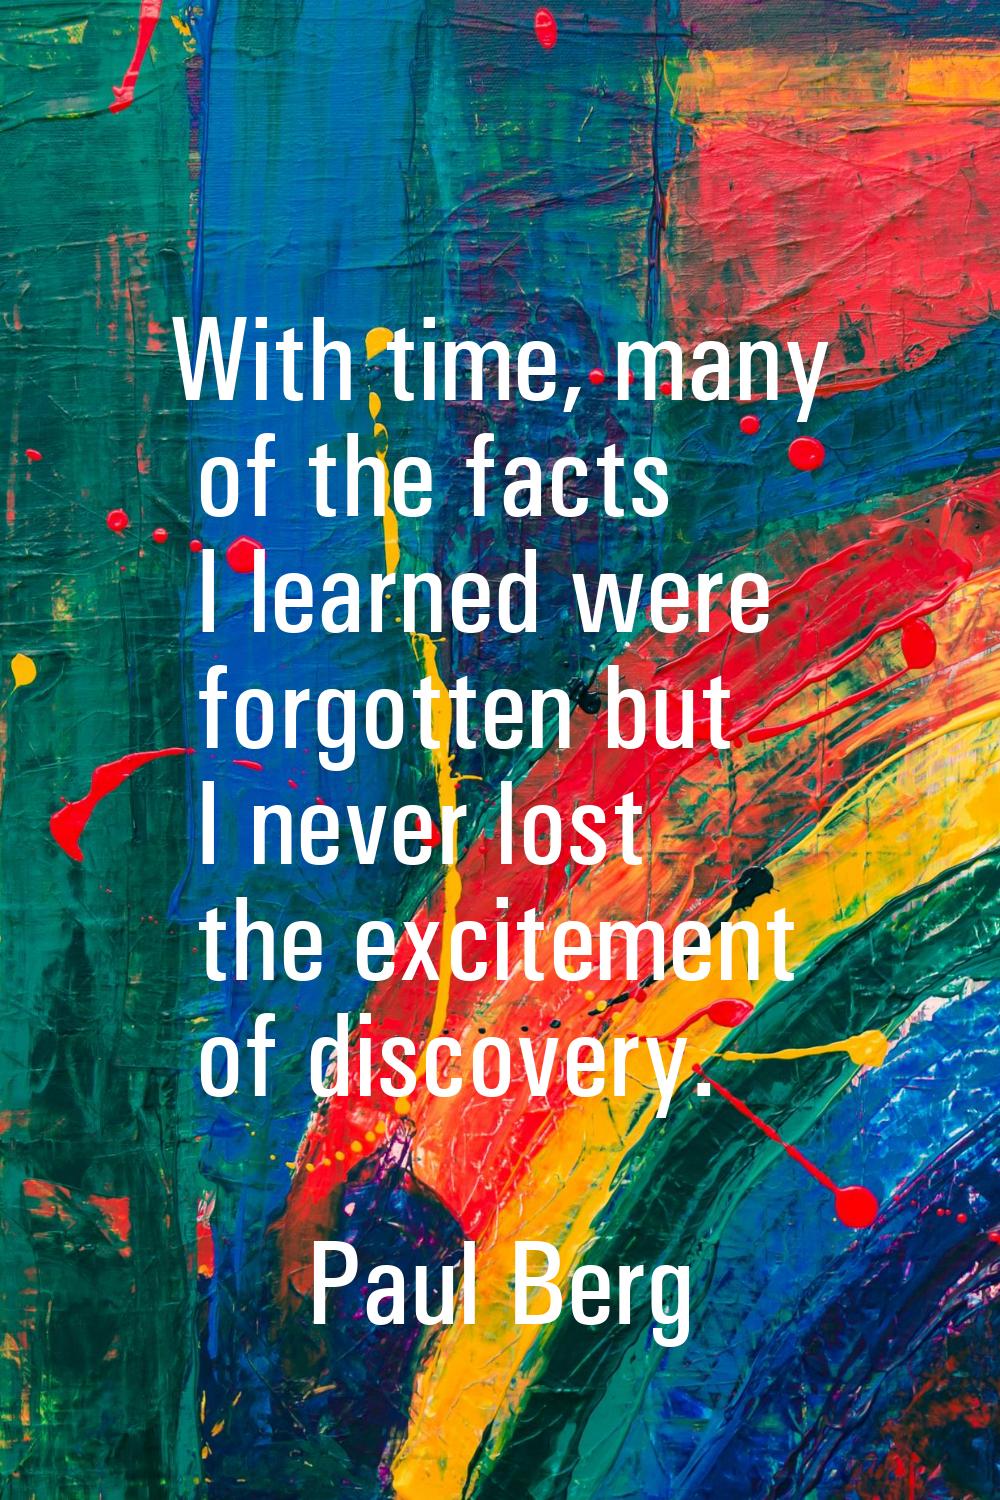 With time, many of the facts I learned were forgotten but I never lost the excitement of discovery.